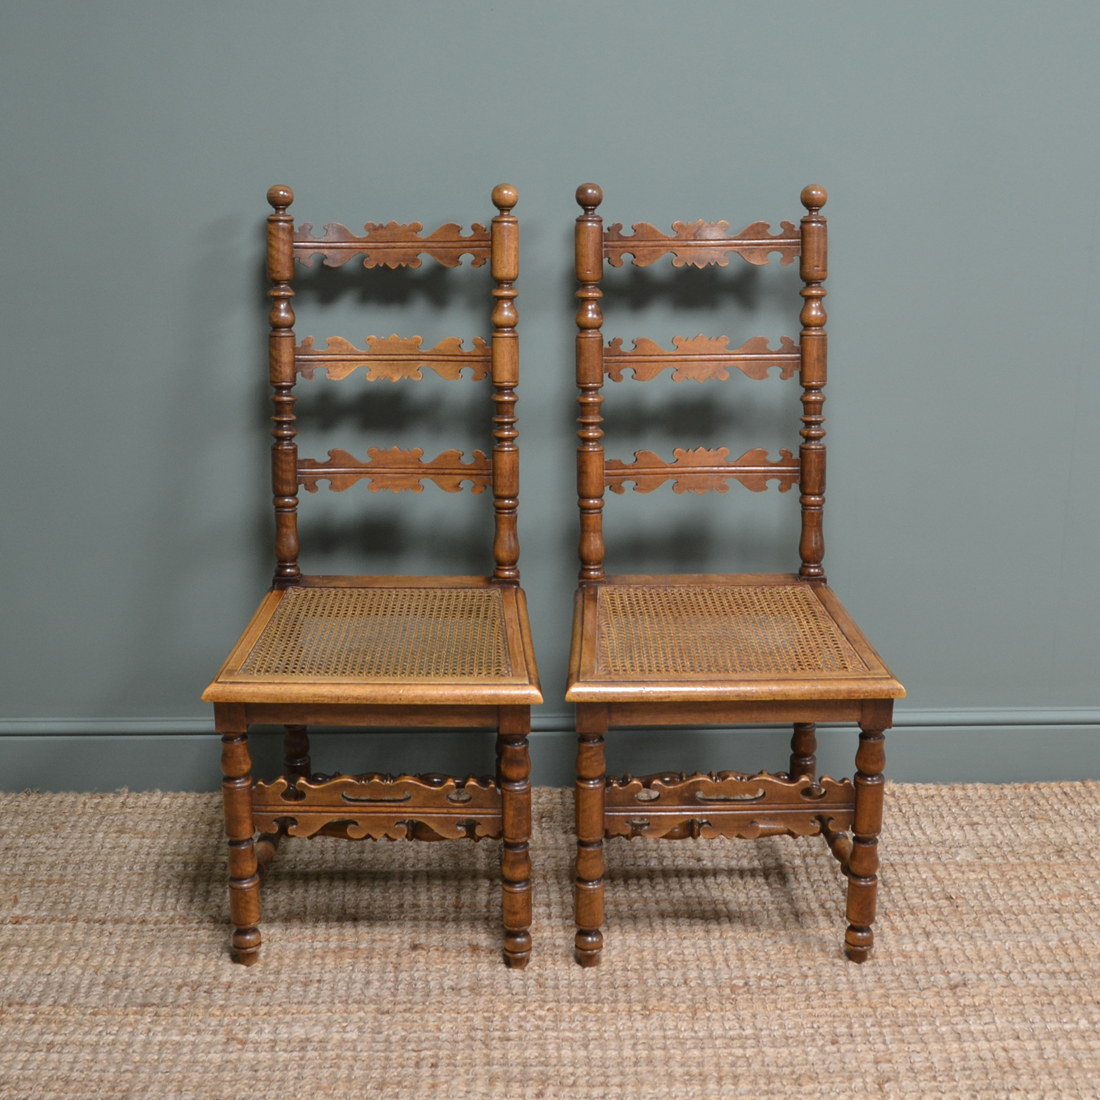 Pair of Fruitwood Antique Ladder Back Chairs